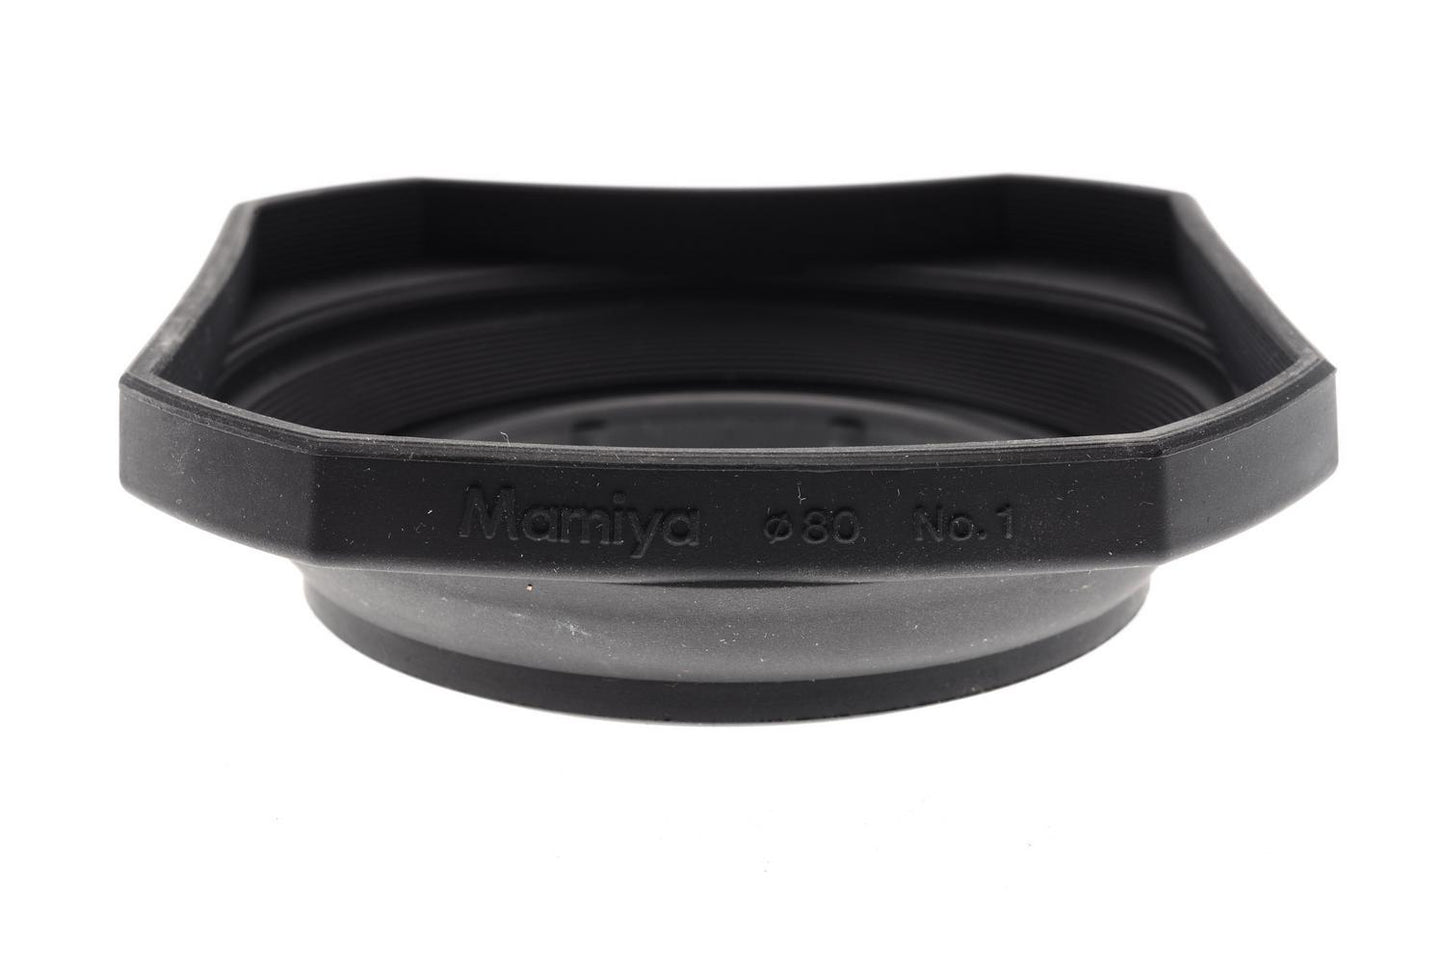 Mamiya 80mm Lens Hood No. 1 for 50mm / 65mm (RZ67/RB67) and 45mm (M645) - Accessory